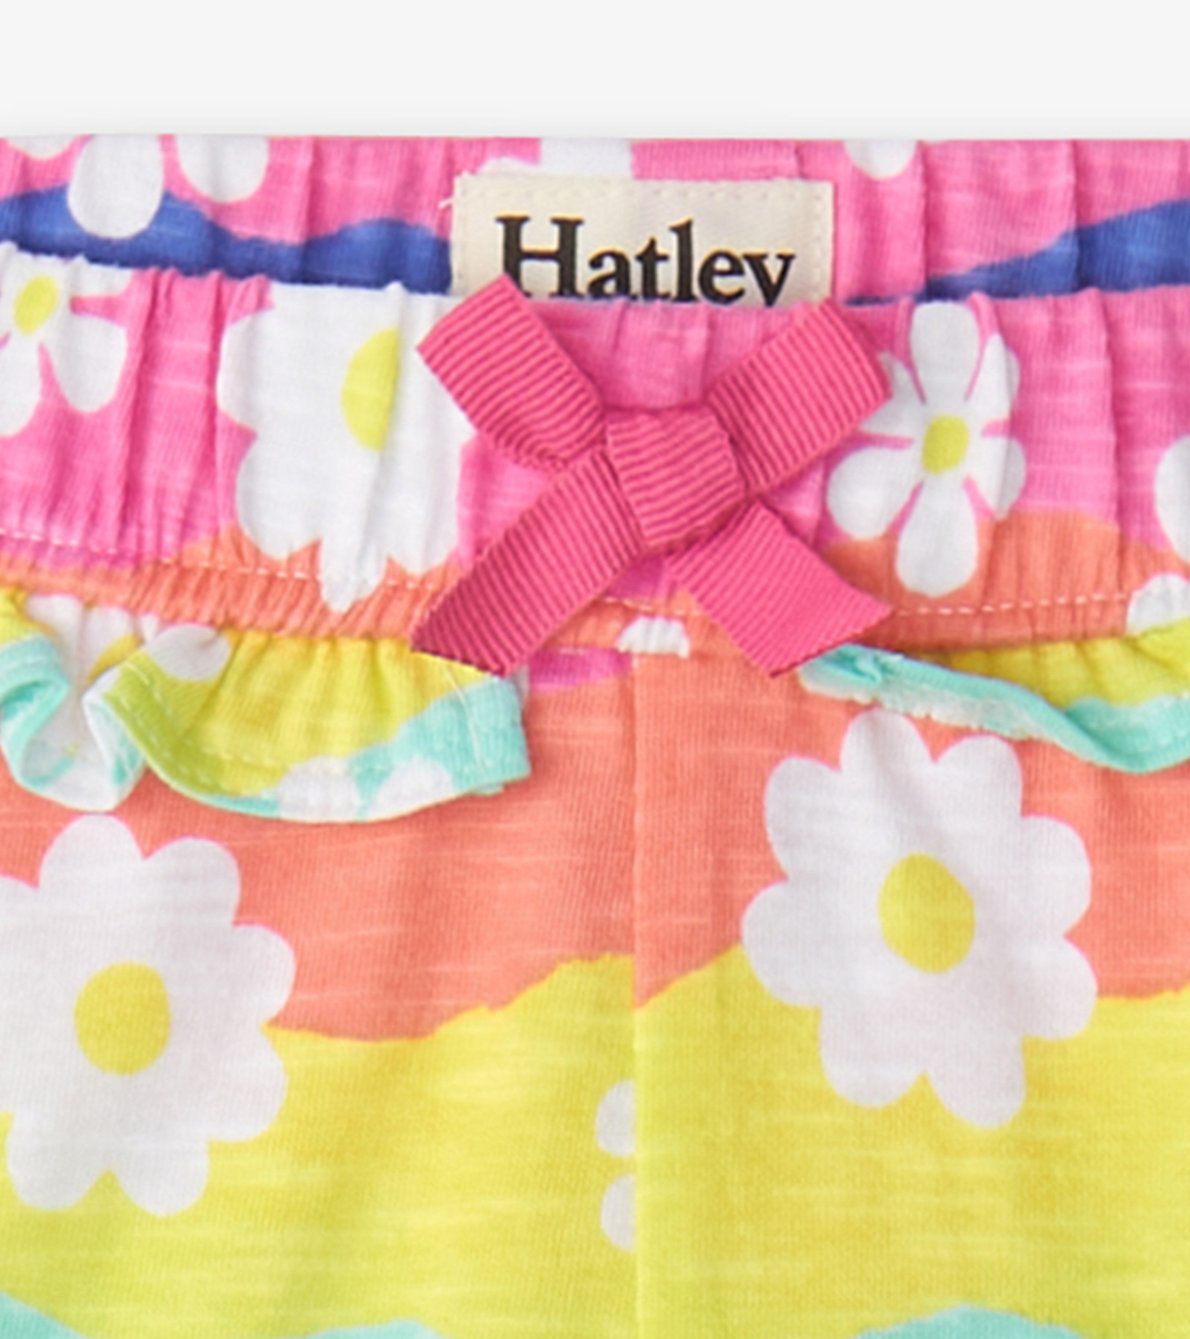 View larger image of Baby & Toddler Girls Groovy Flowers Ruffle Shorts